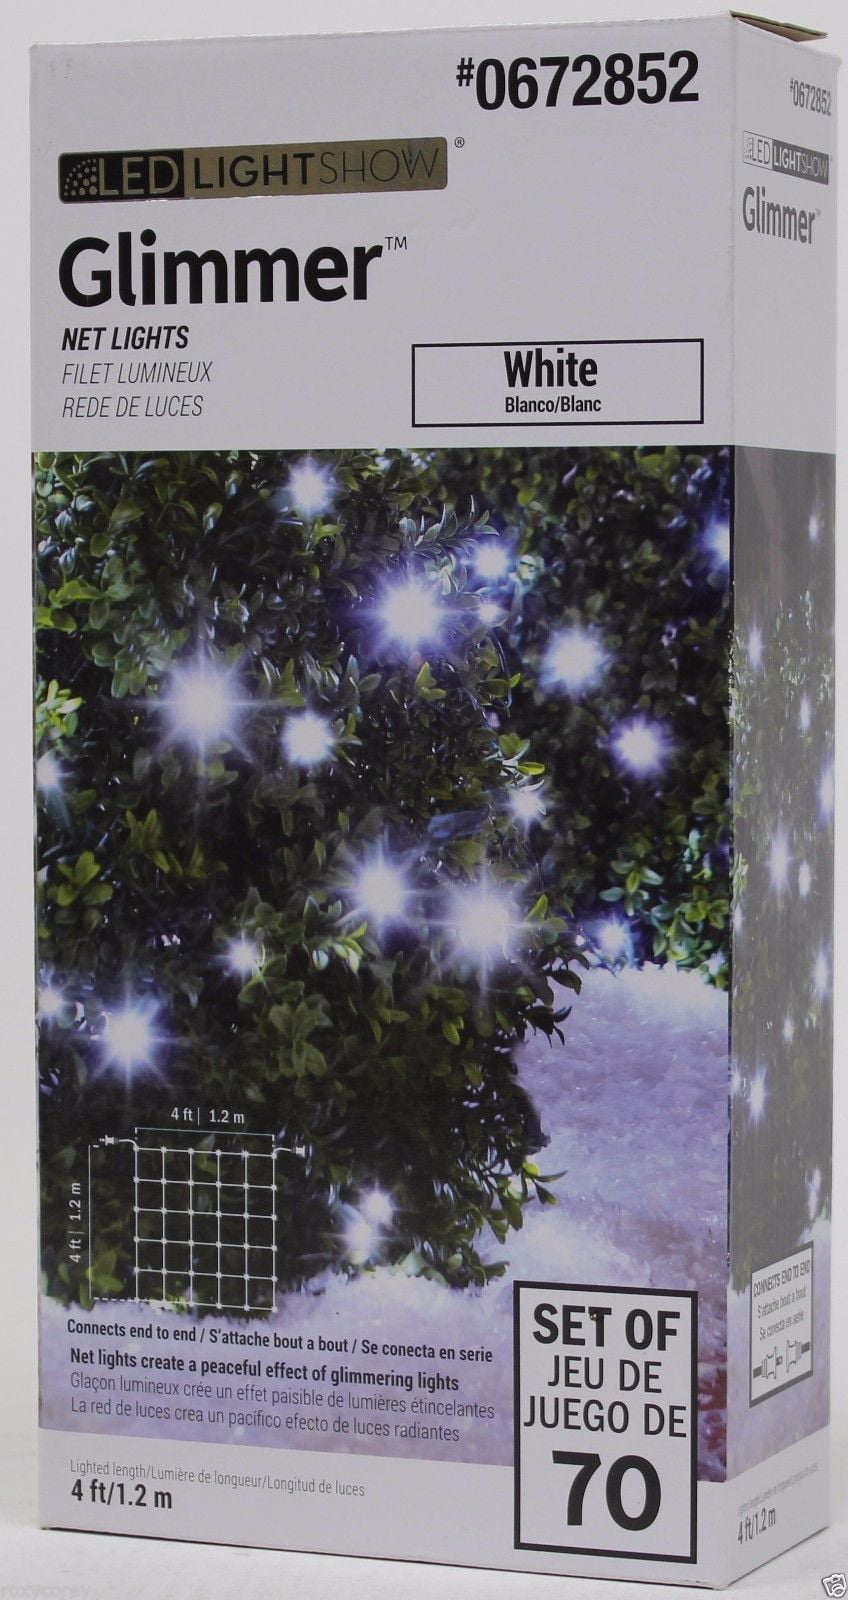 LightShow Starry Night 70 LED Flickering Twinkling 4 x 4 Ft Net Christmas Lights 